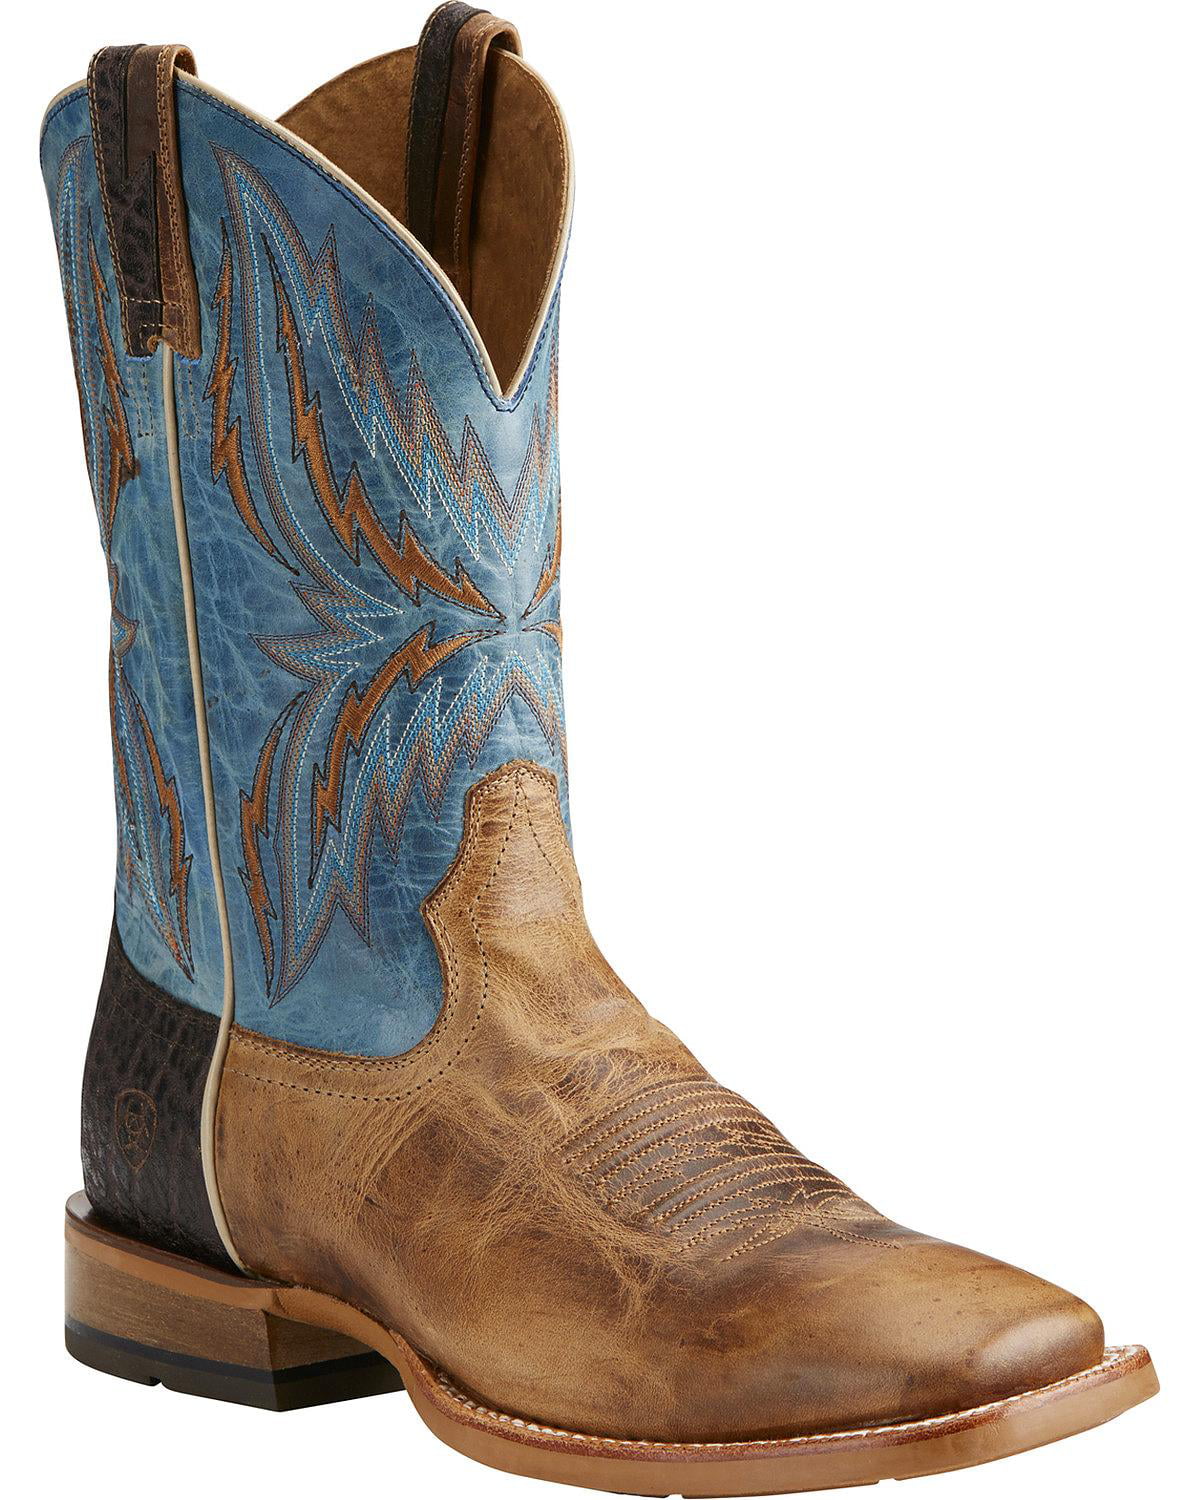 Ariat - 10021679 Ariat Men's Arena Rebound Western Boots - Dusted Wheat ...